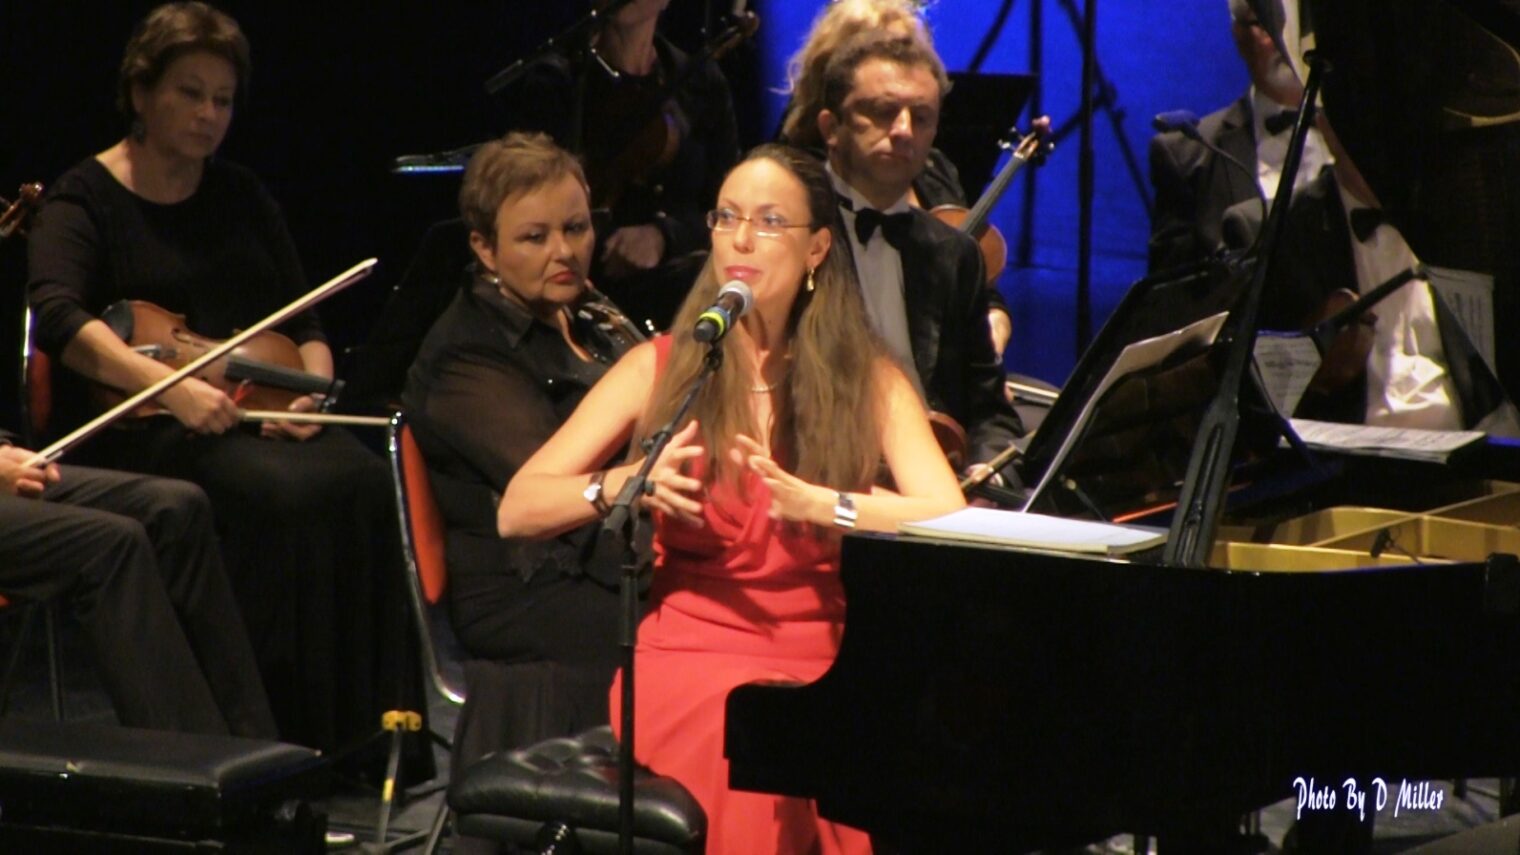 Orit Wolf performing in Ashdod. Photo by D. Miller